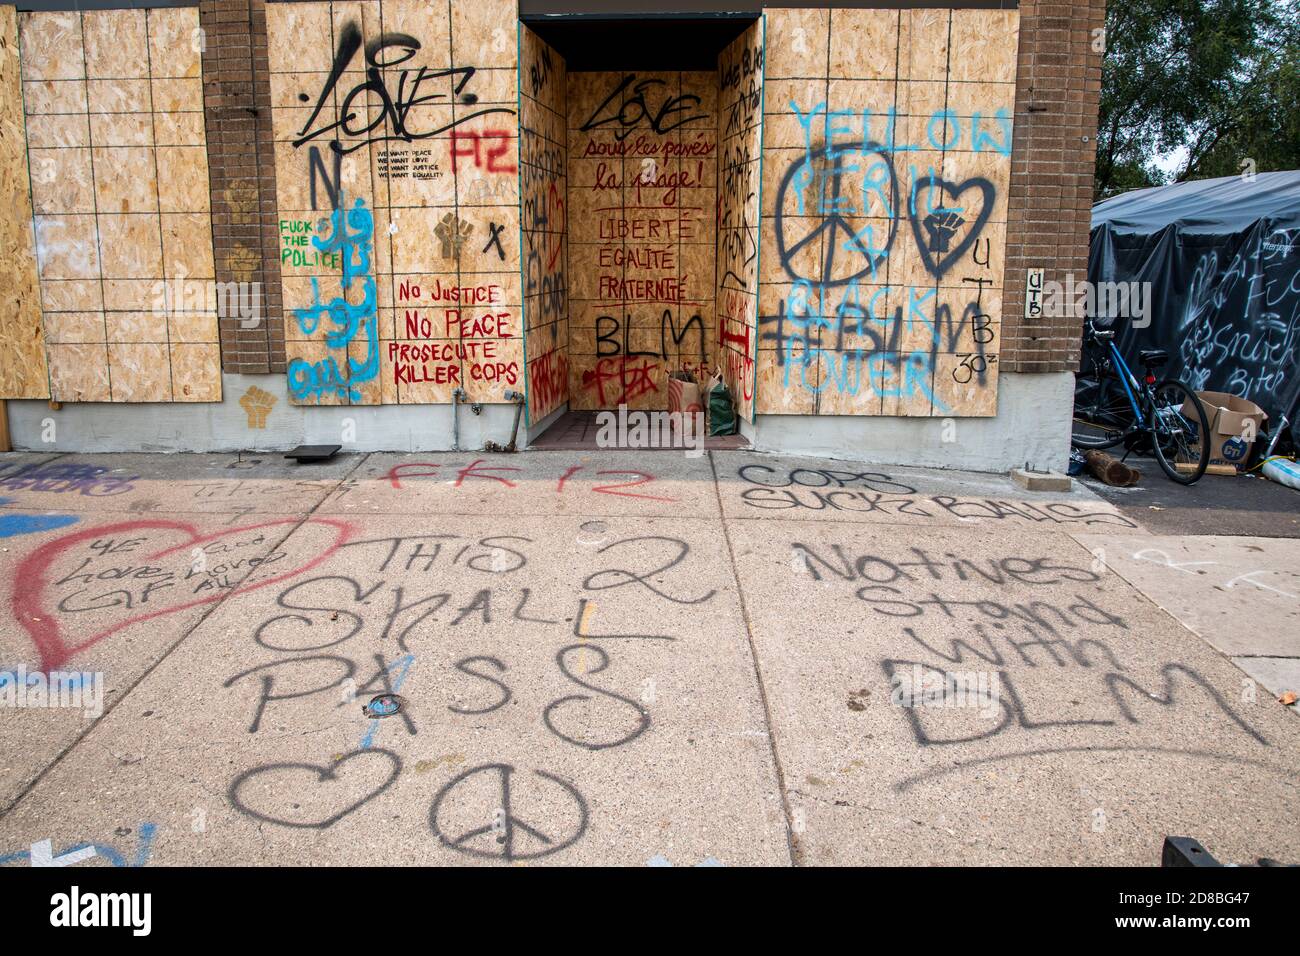 Minneapolis, MN.  Street art and graffiti on boarded up business at George Floyd memorial site. Stock Photo